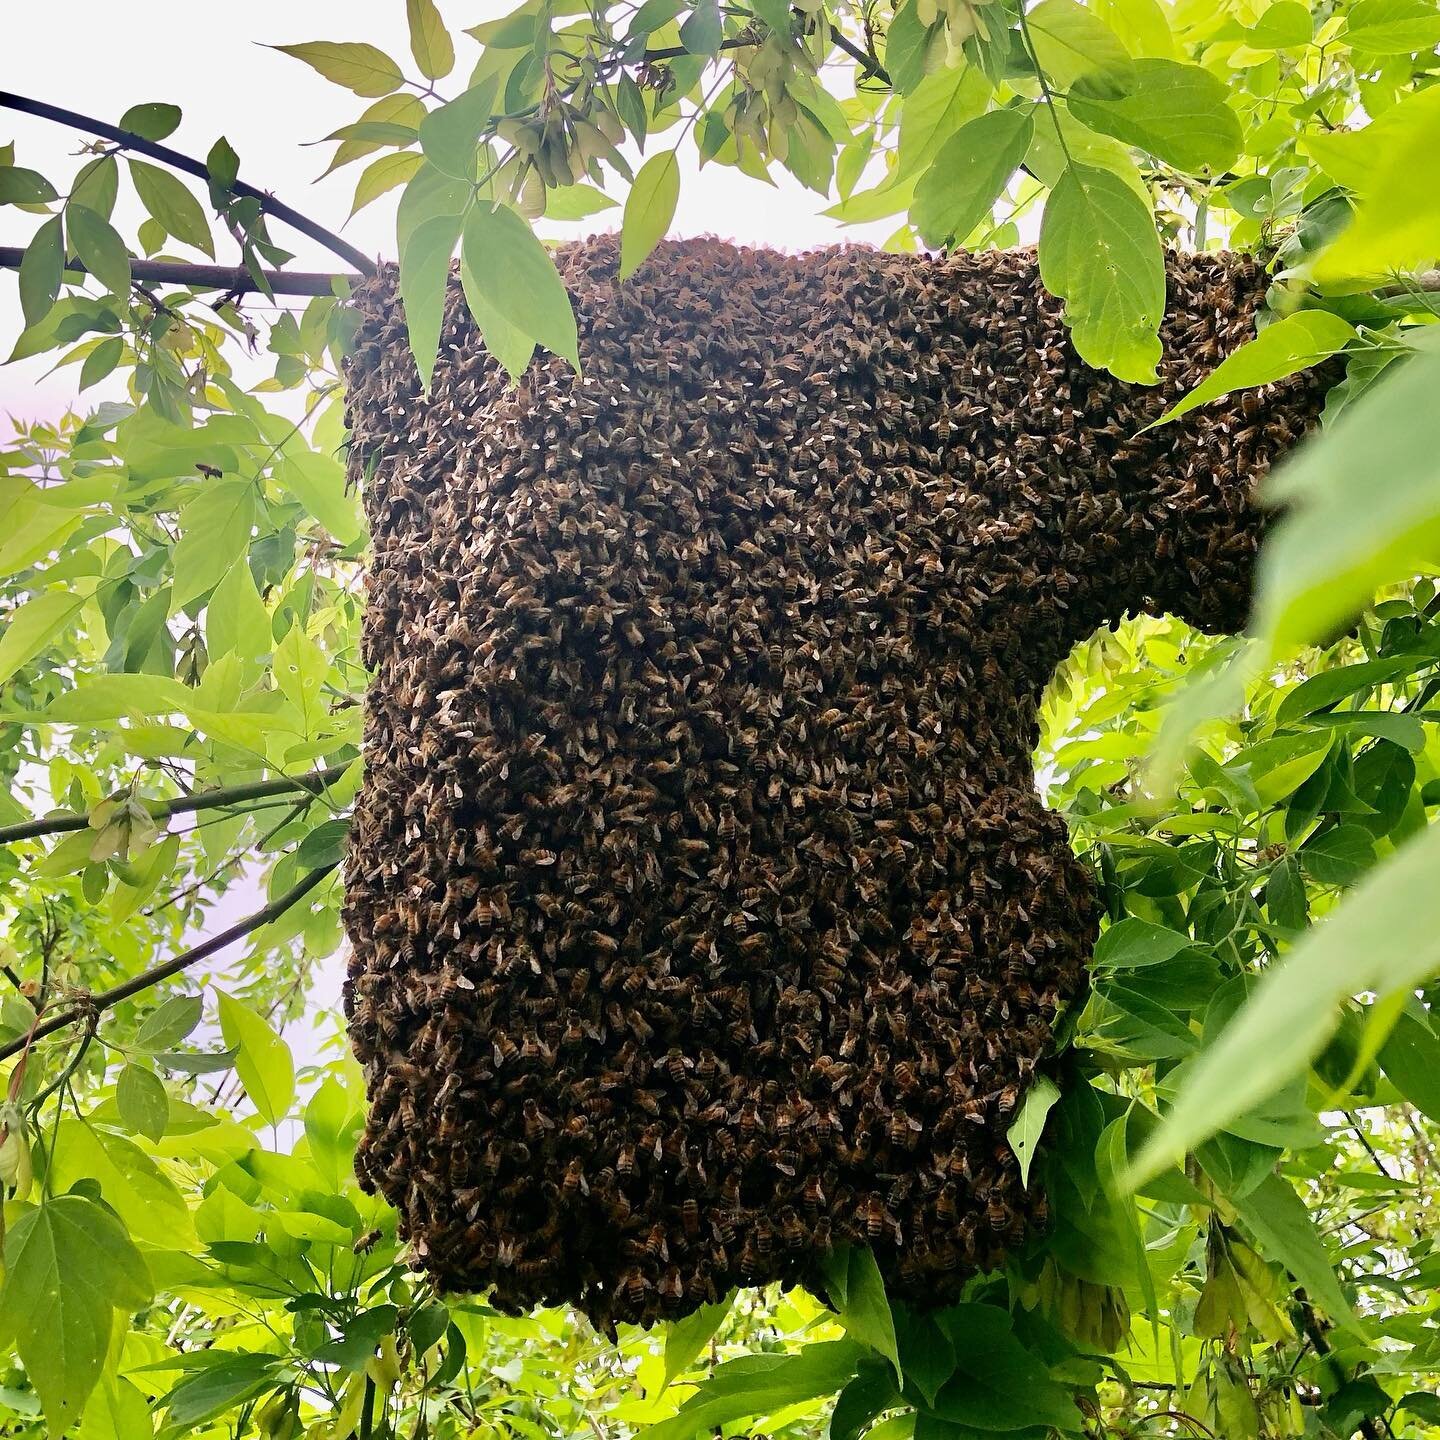 The bees picked a cloudy day to swarm! 🐝